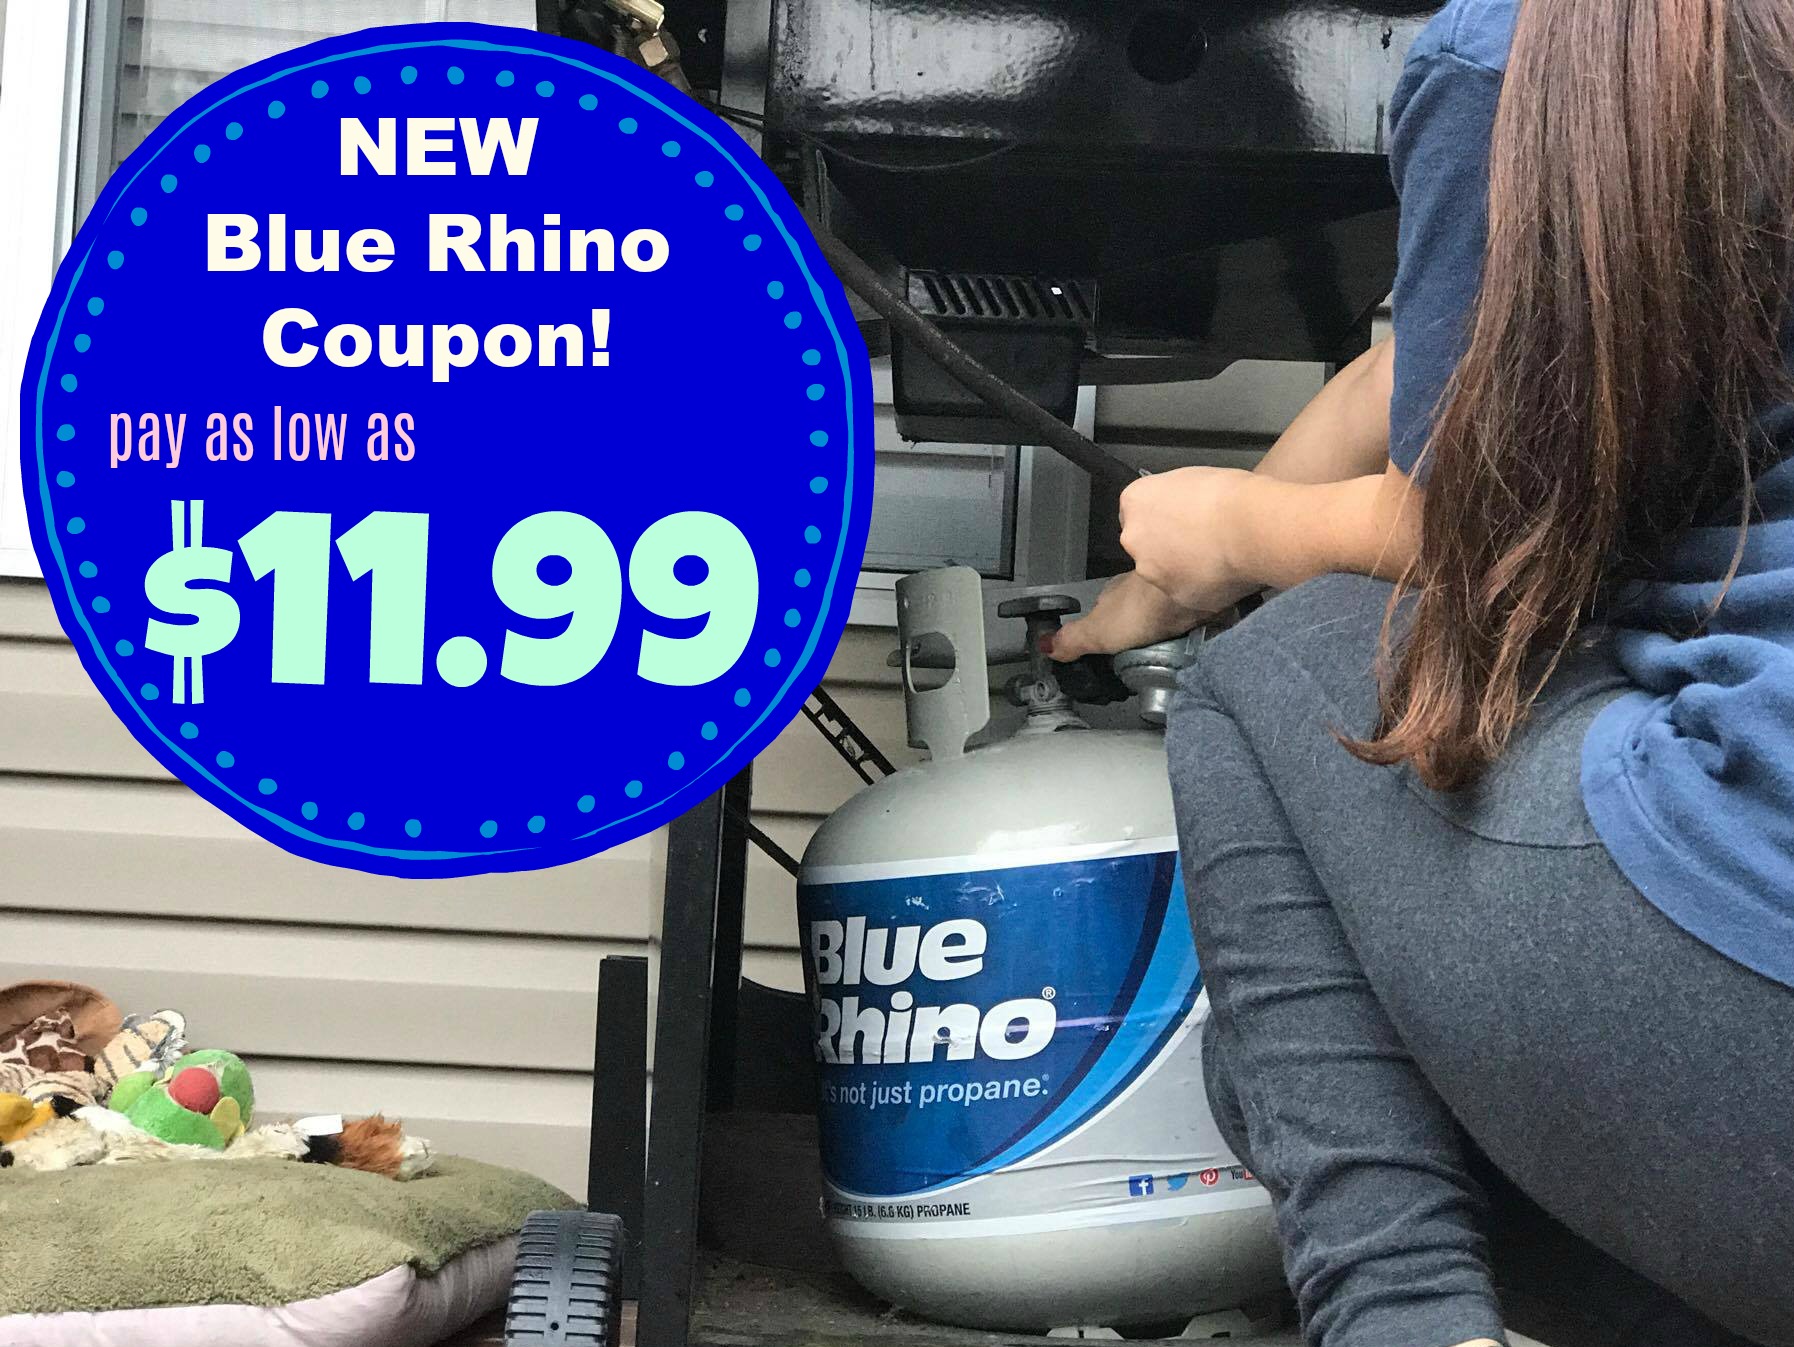 add-a-bit-more-style-to-your-truck-with-go-rhino-accessories-rebate